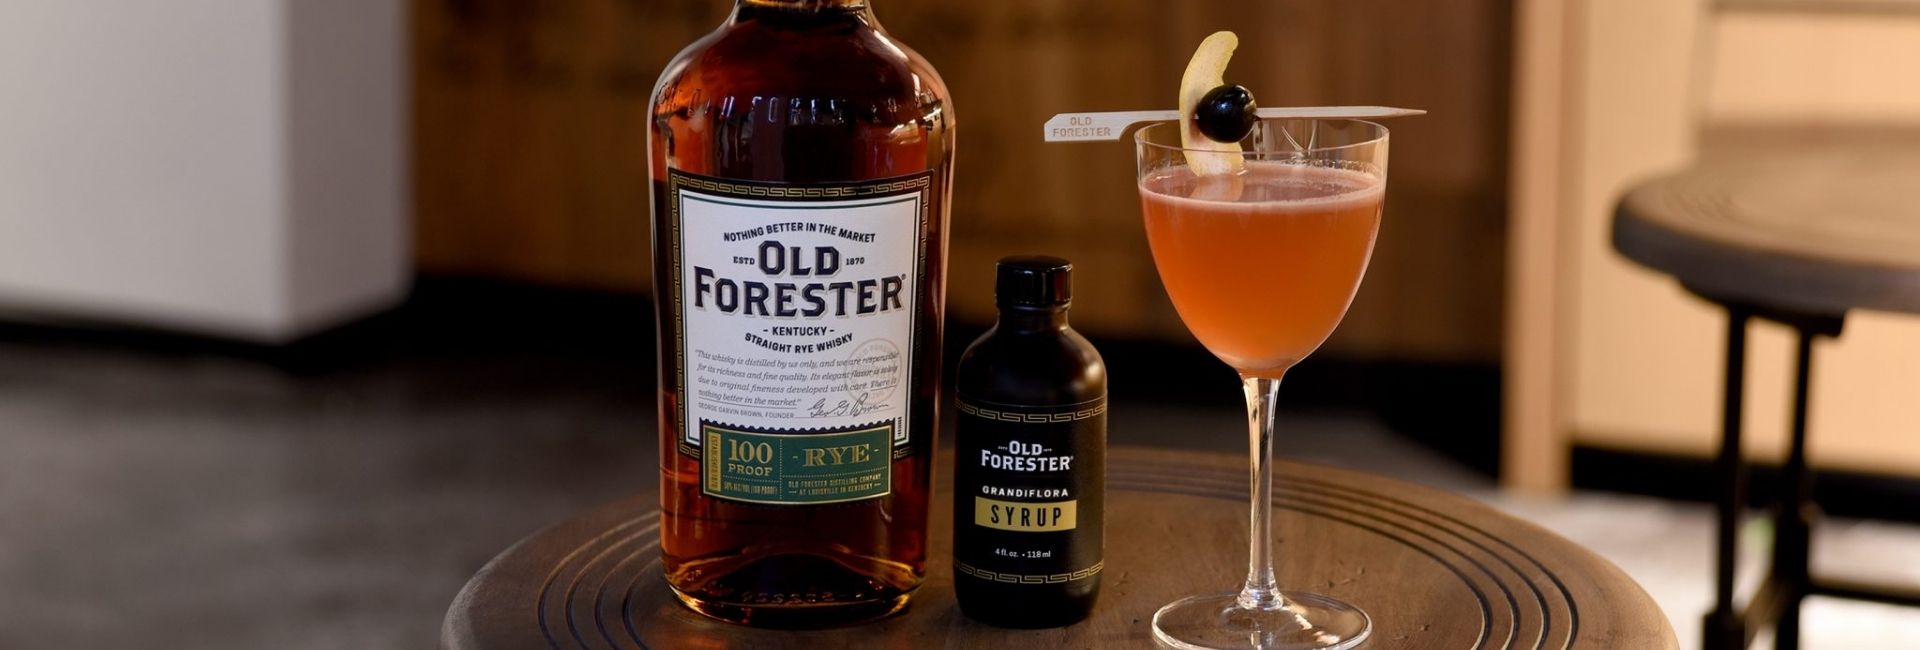 The Old Forester Bourbon review